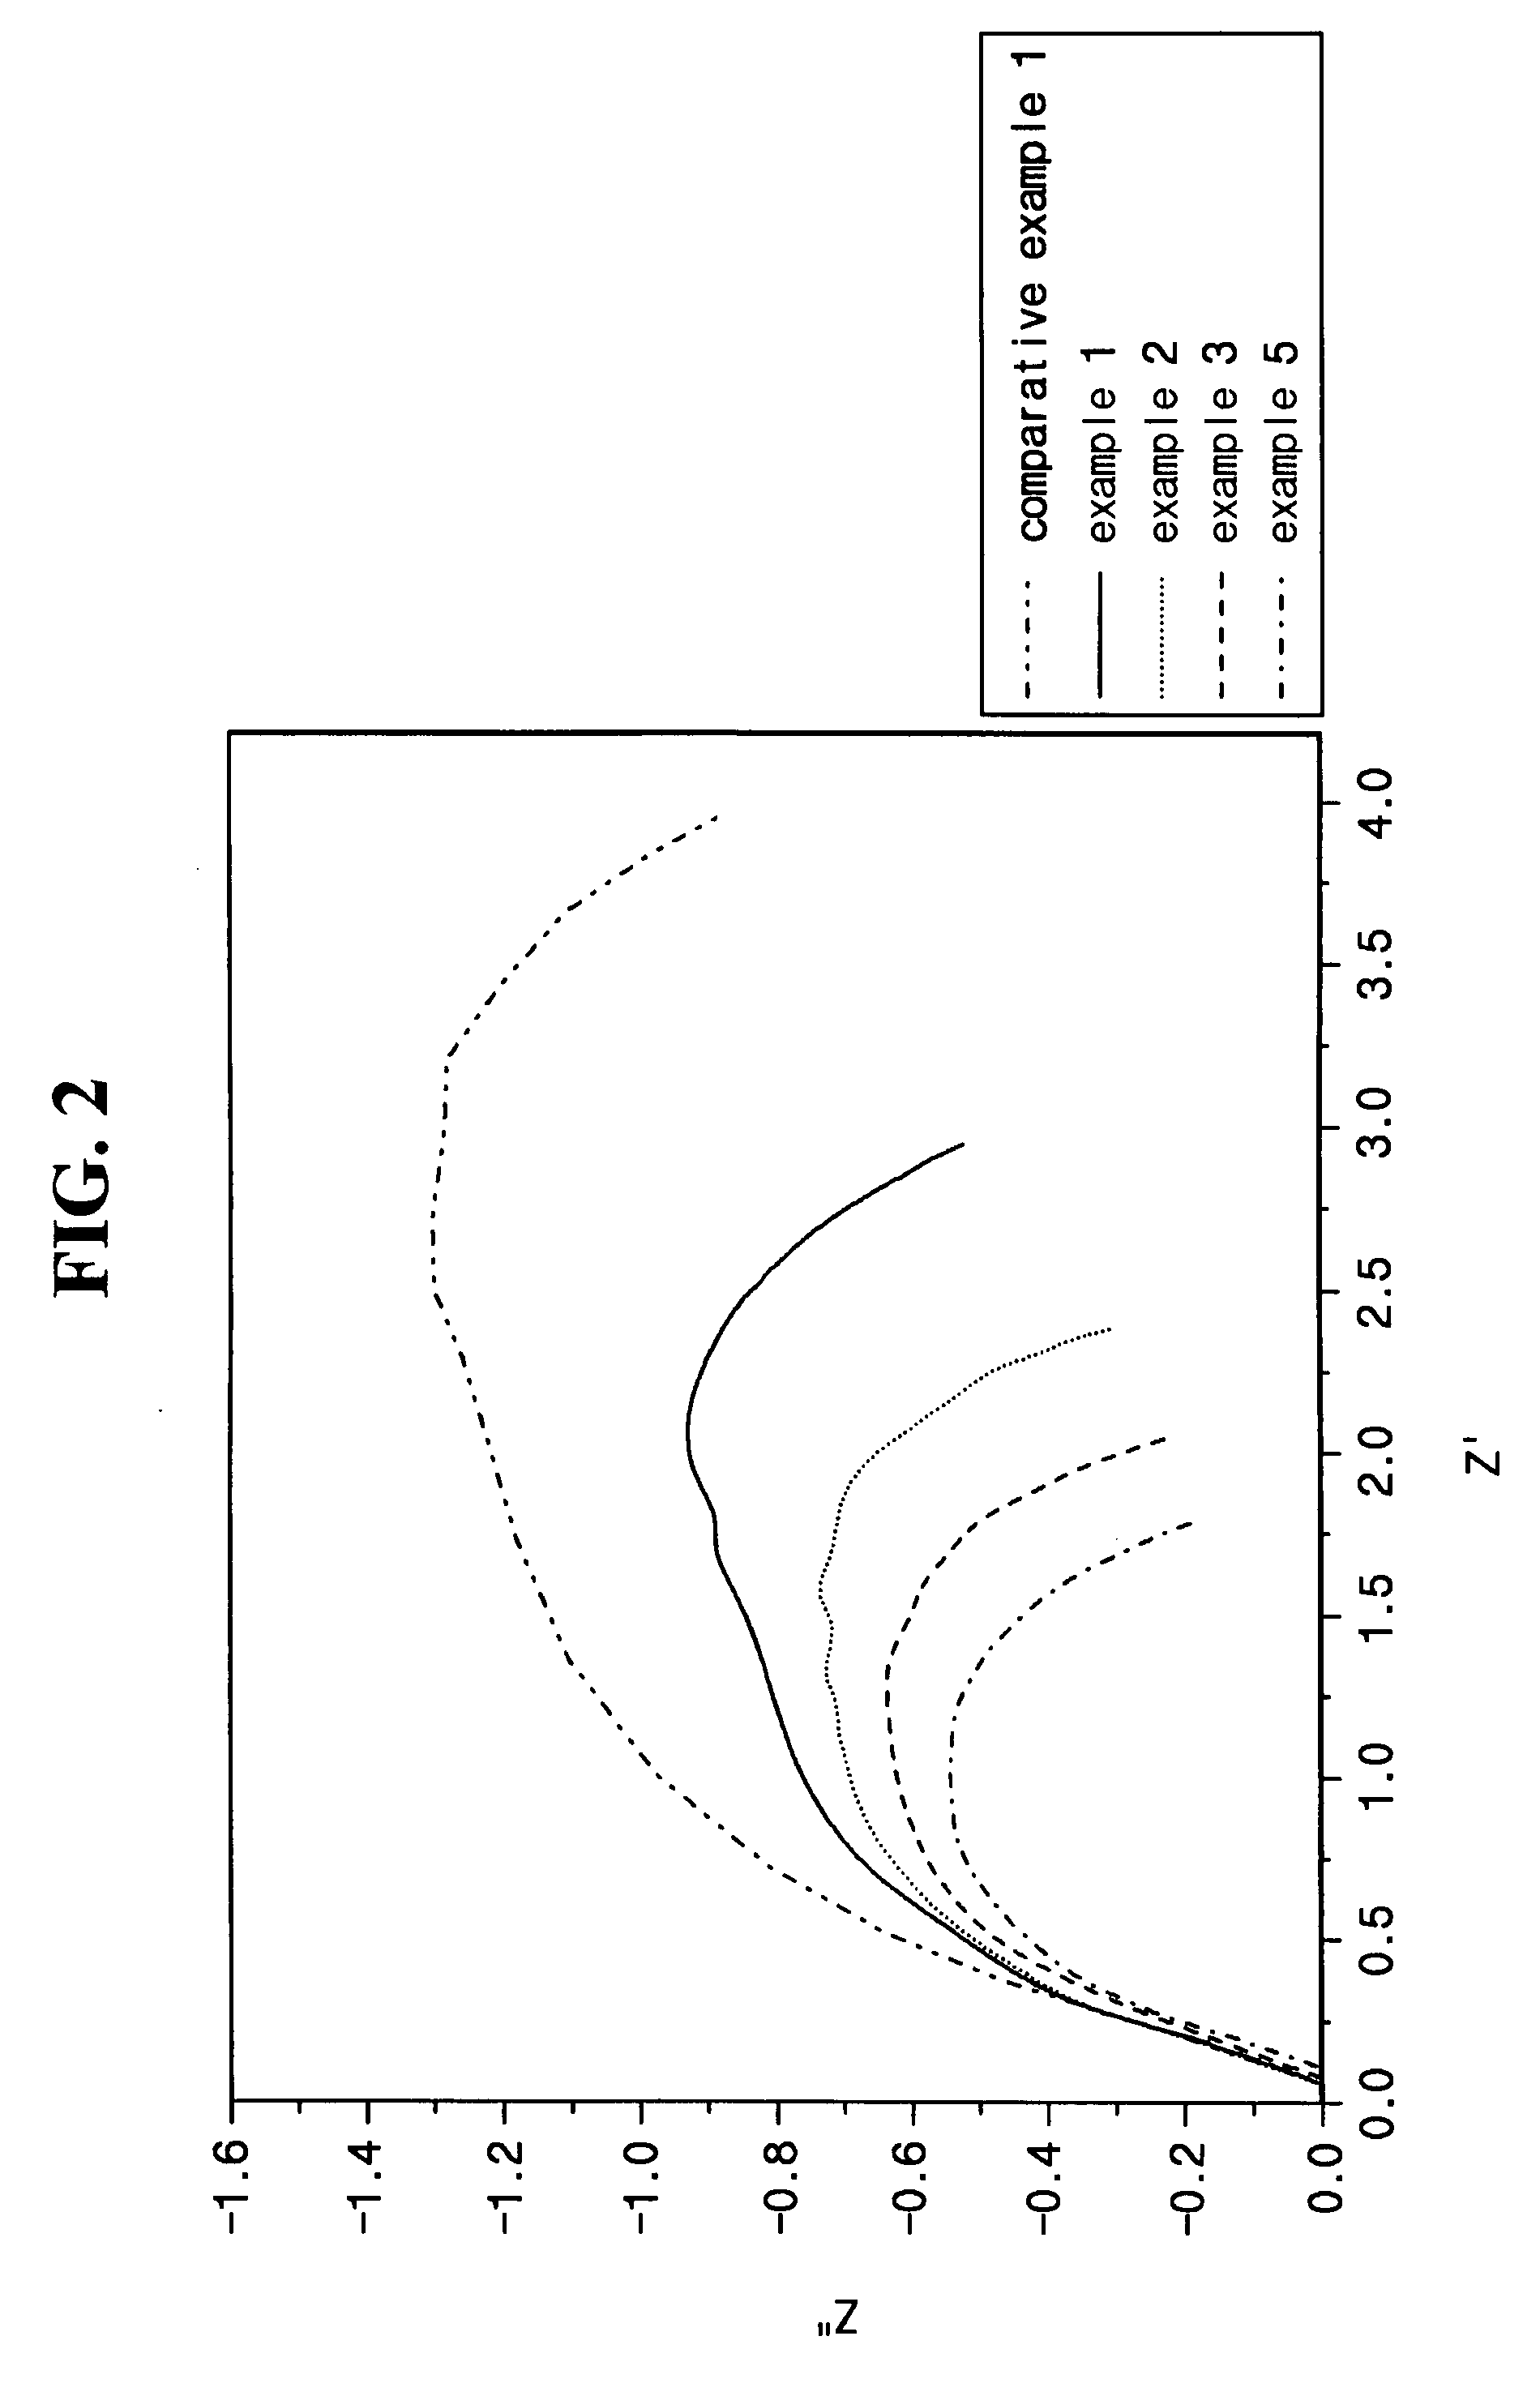 Electrolyte for rechargeable lithium battery, and rechargeable lithium battery including same